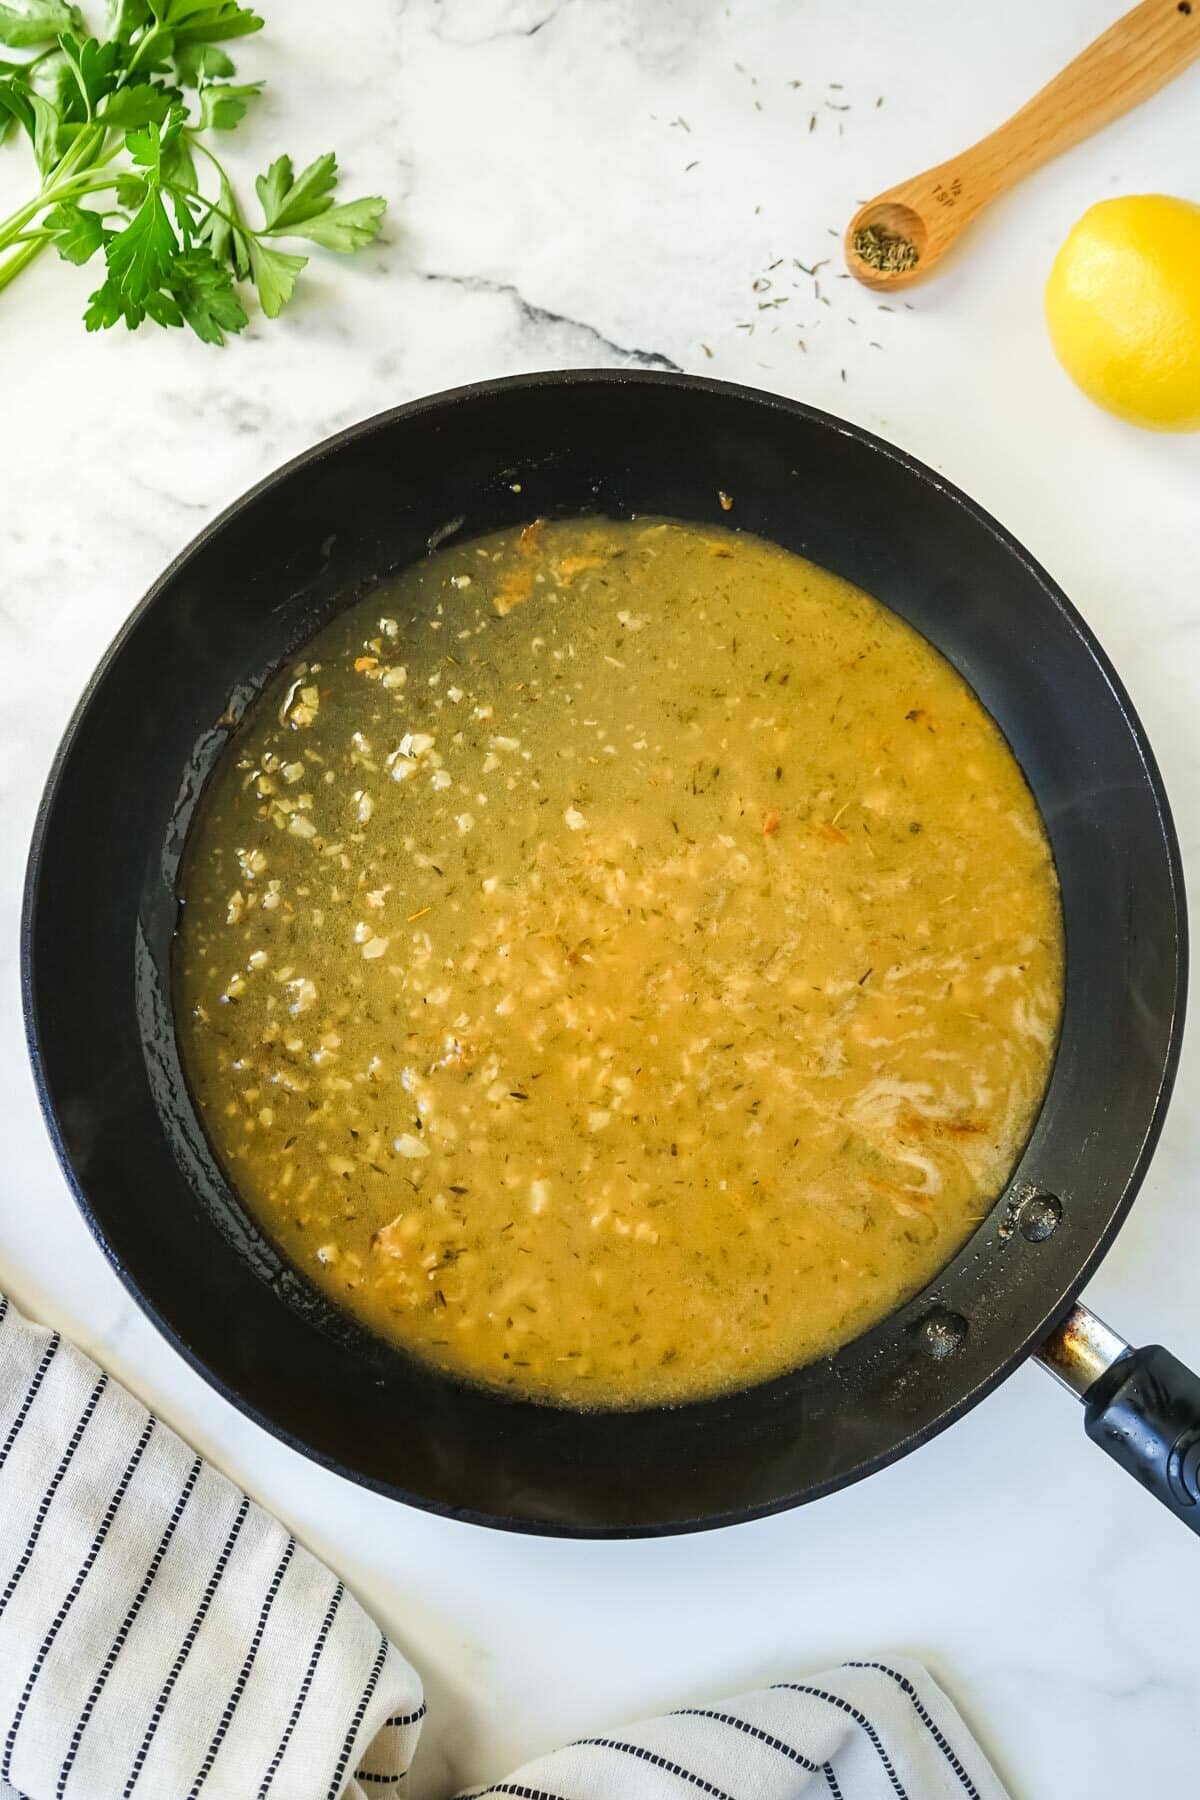 The lemon and white wine sauce cooking in a pan.